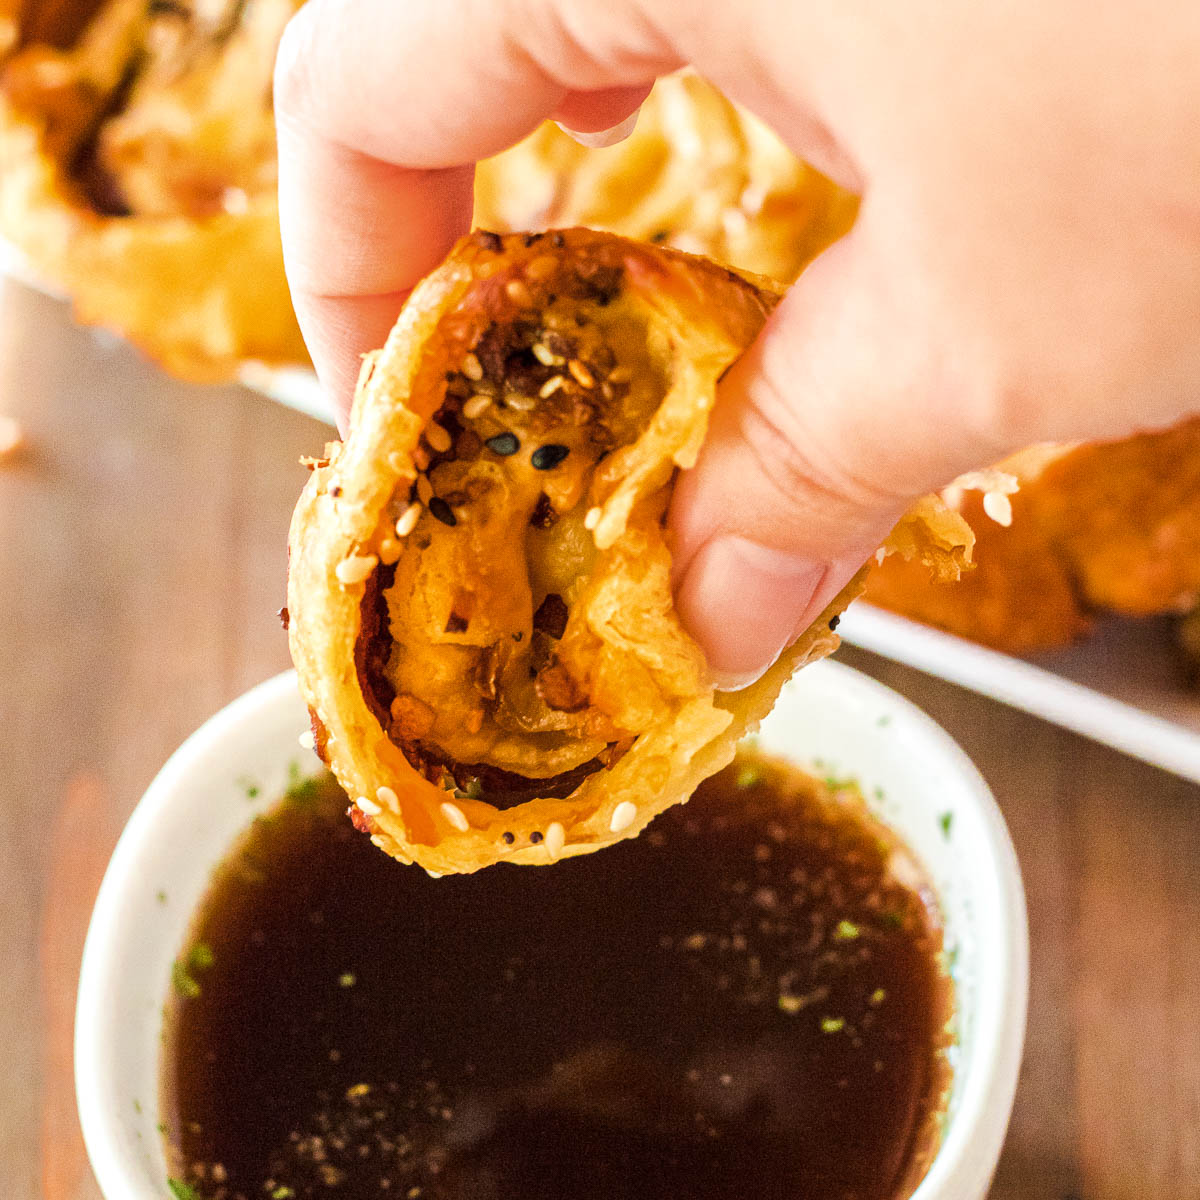 Hand dipping a golden baked French Dip Roast Beef Pinwheel into au jus.